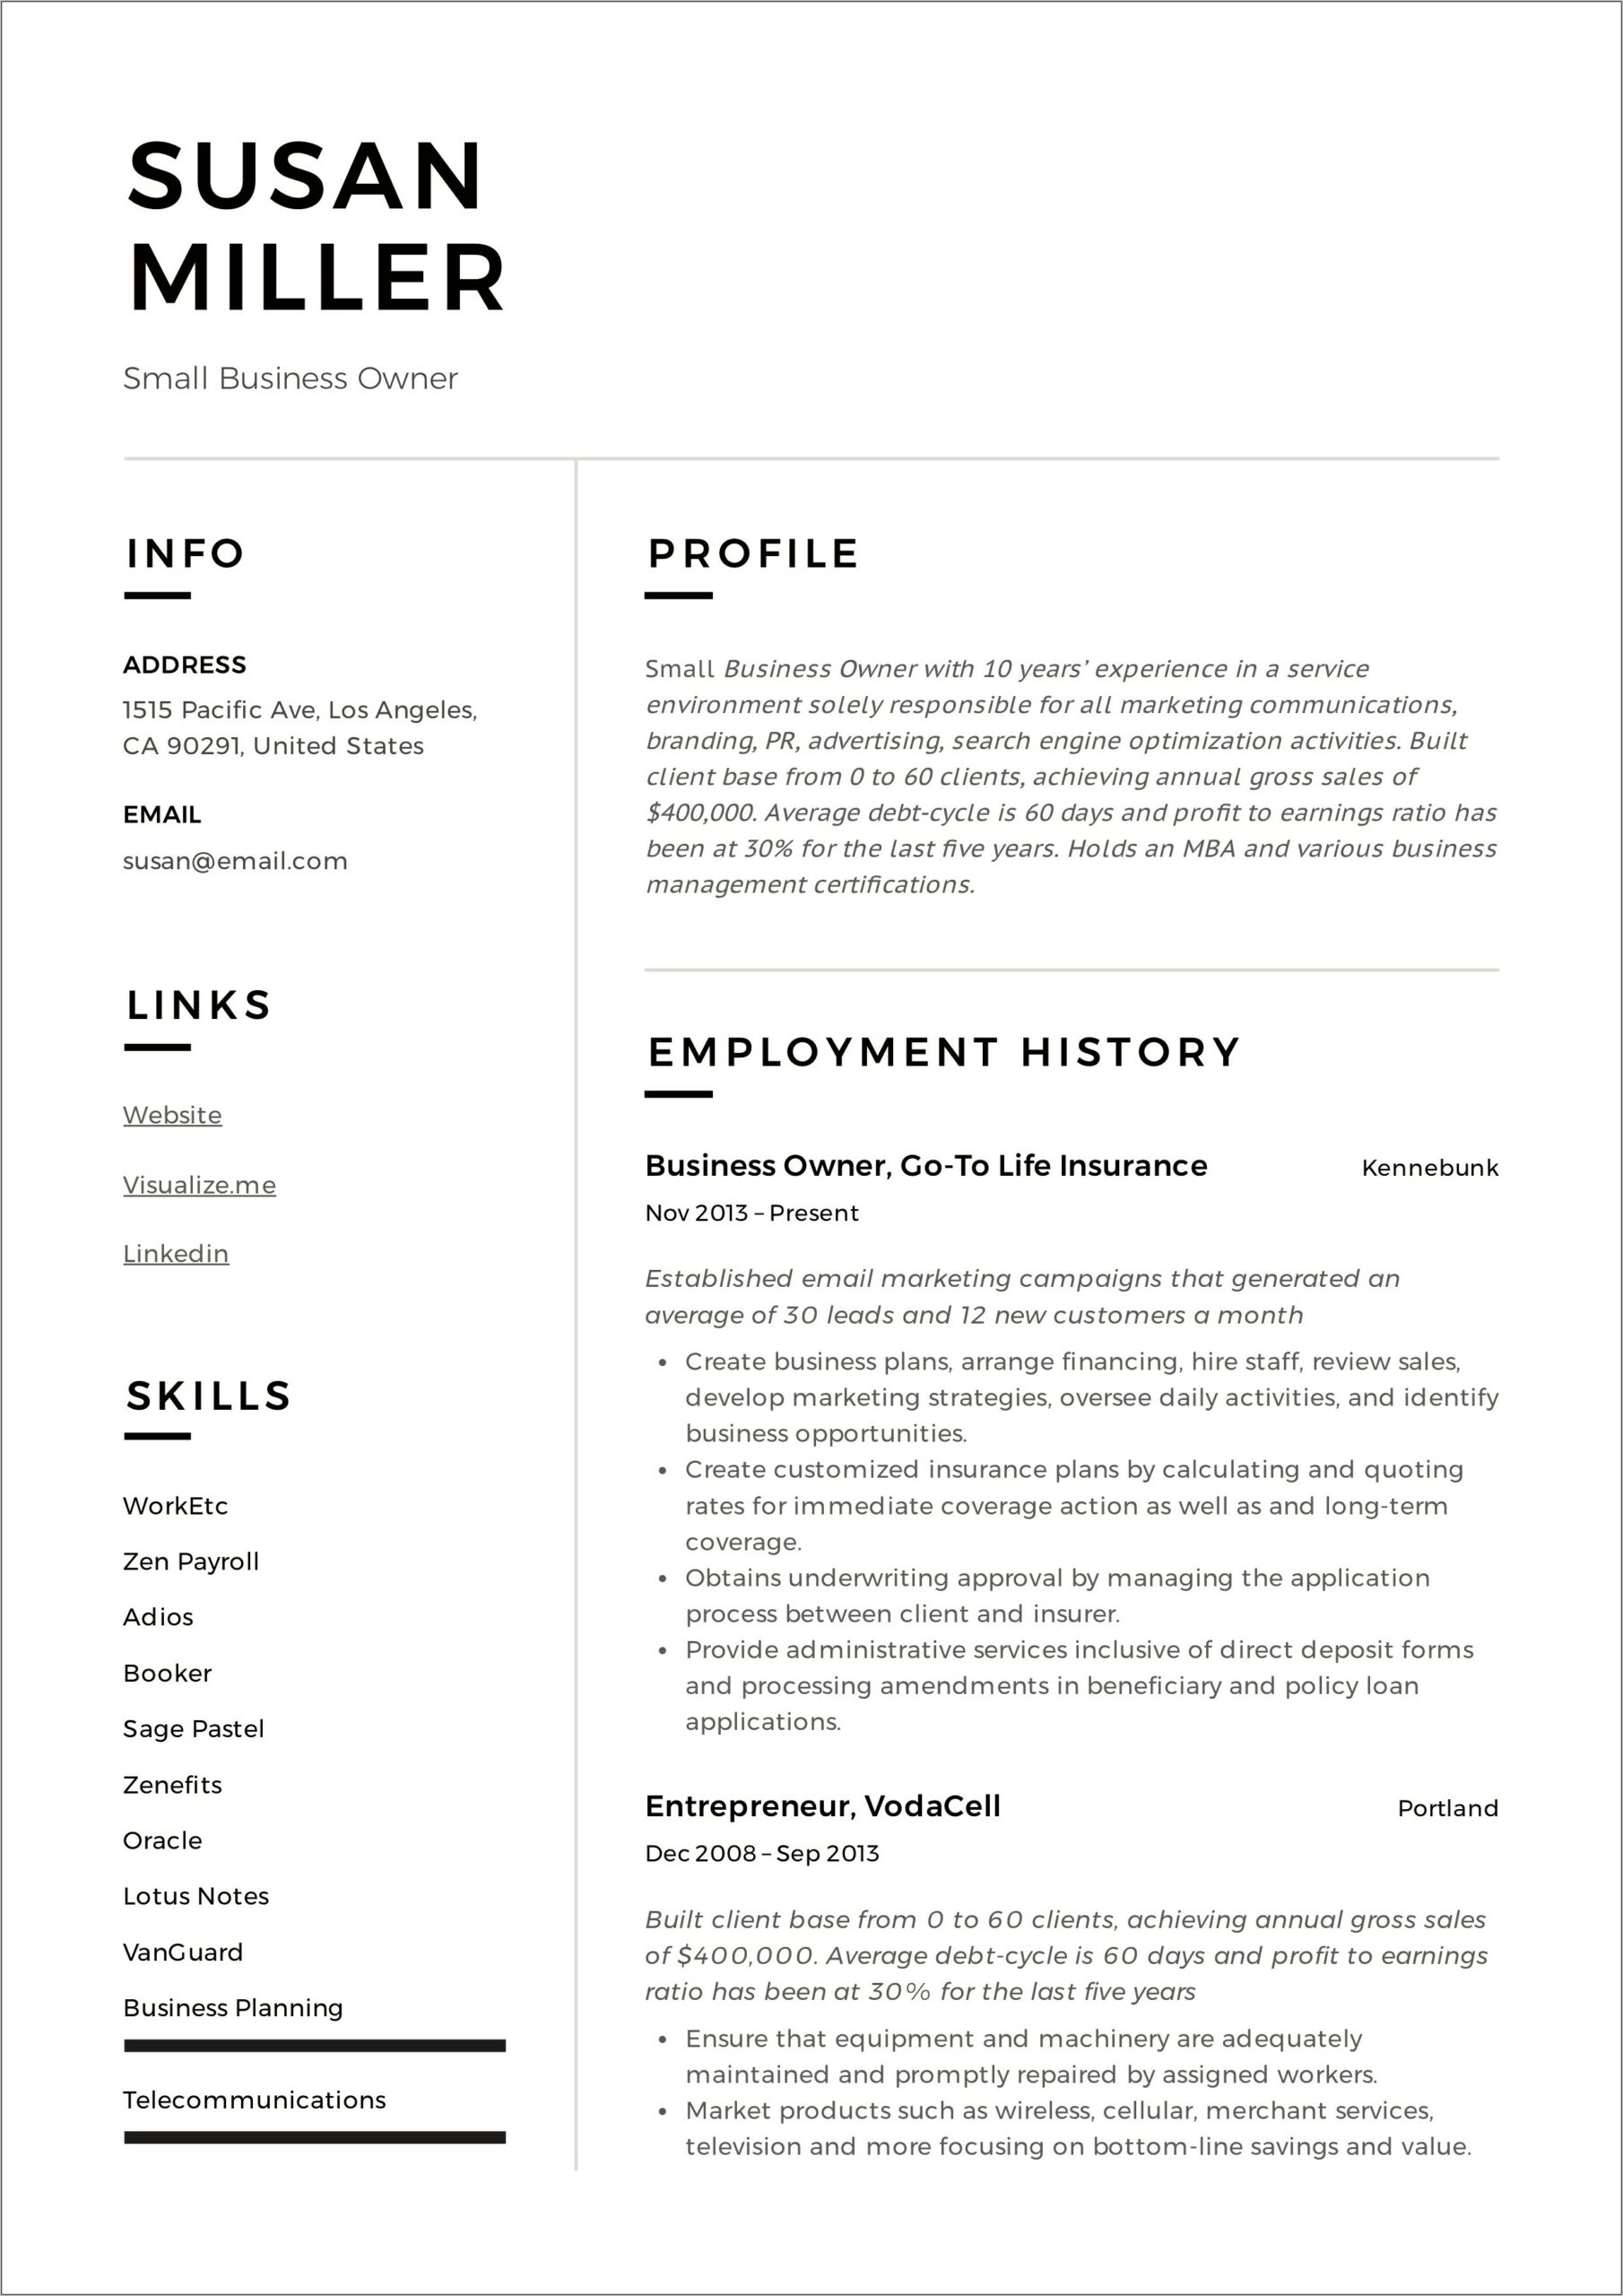 Buisness Owner Resume Skills Examples